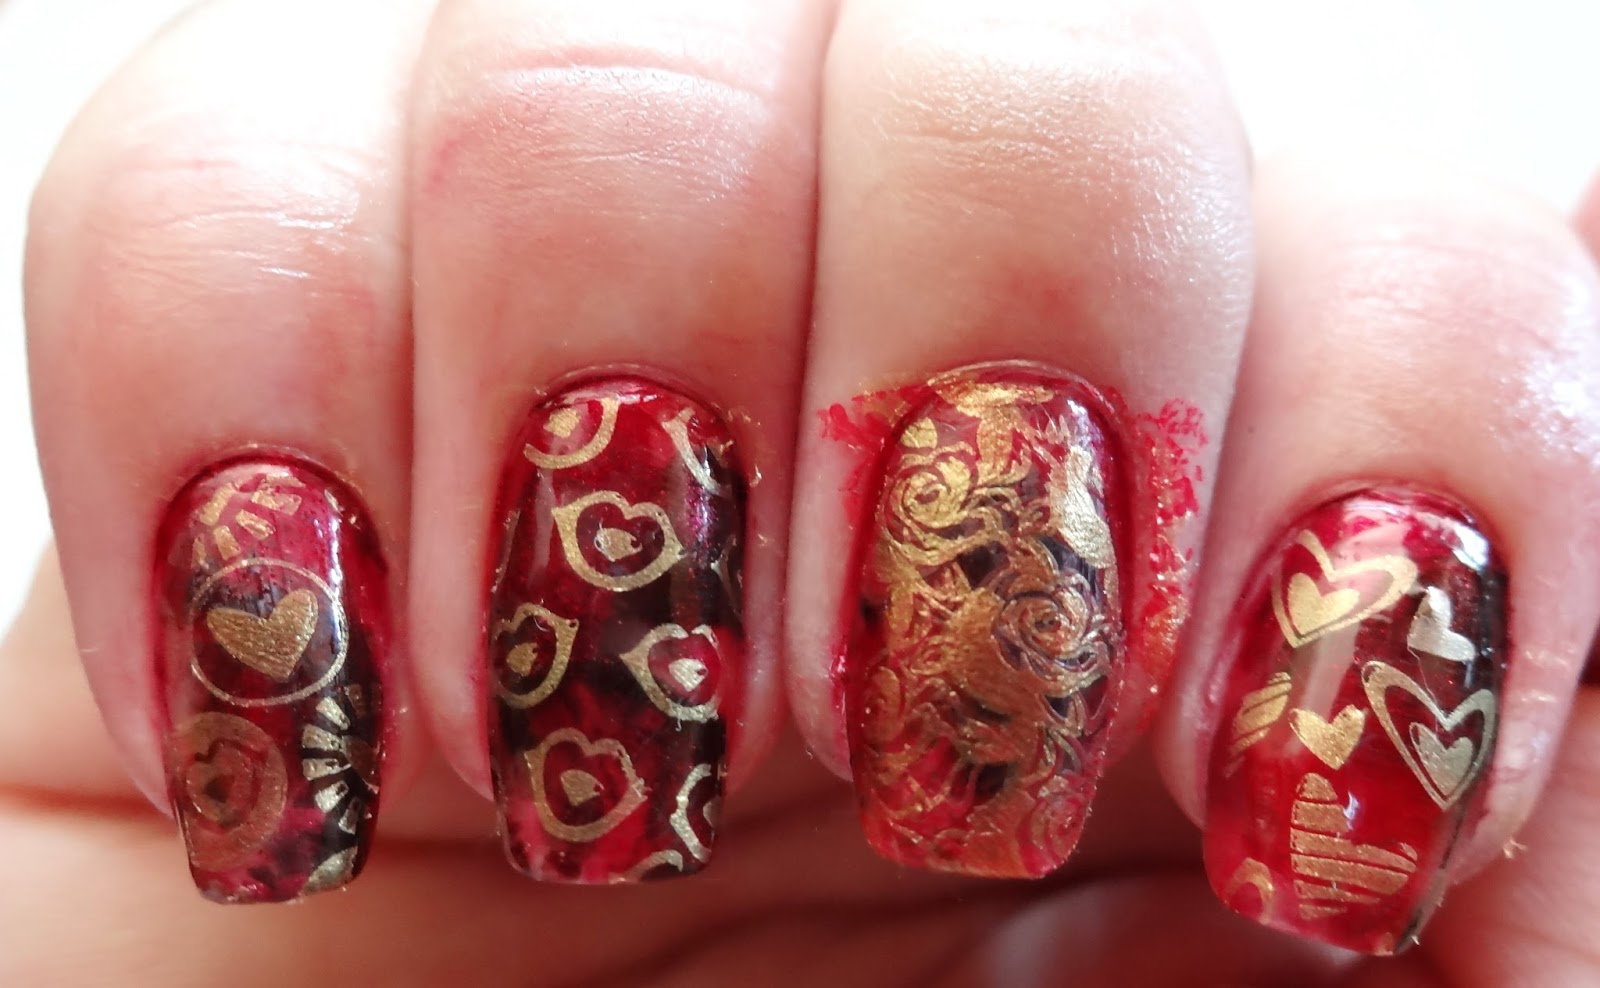 Stamp designs on nails